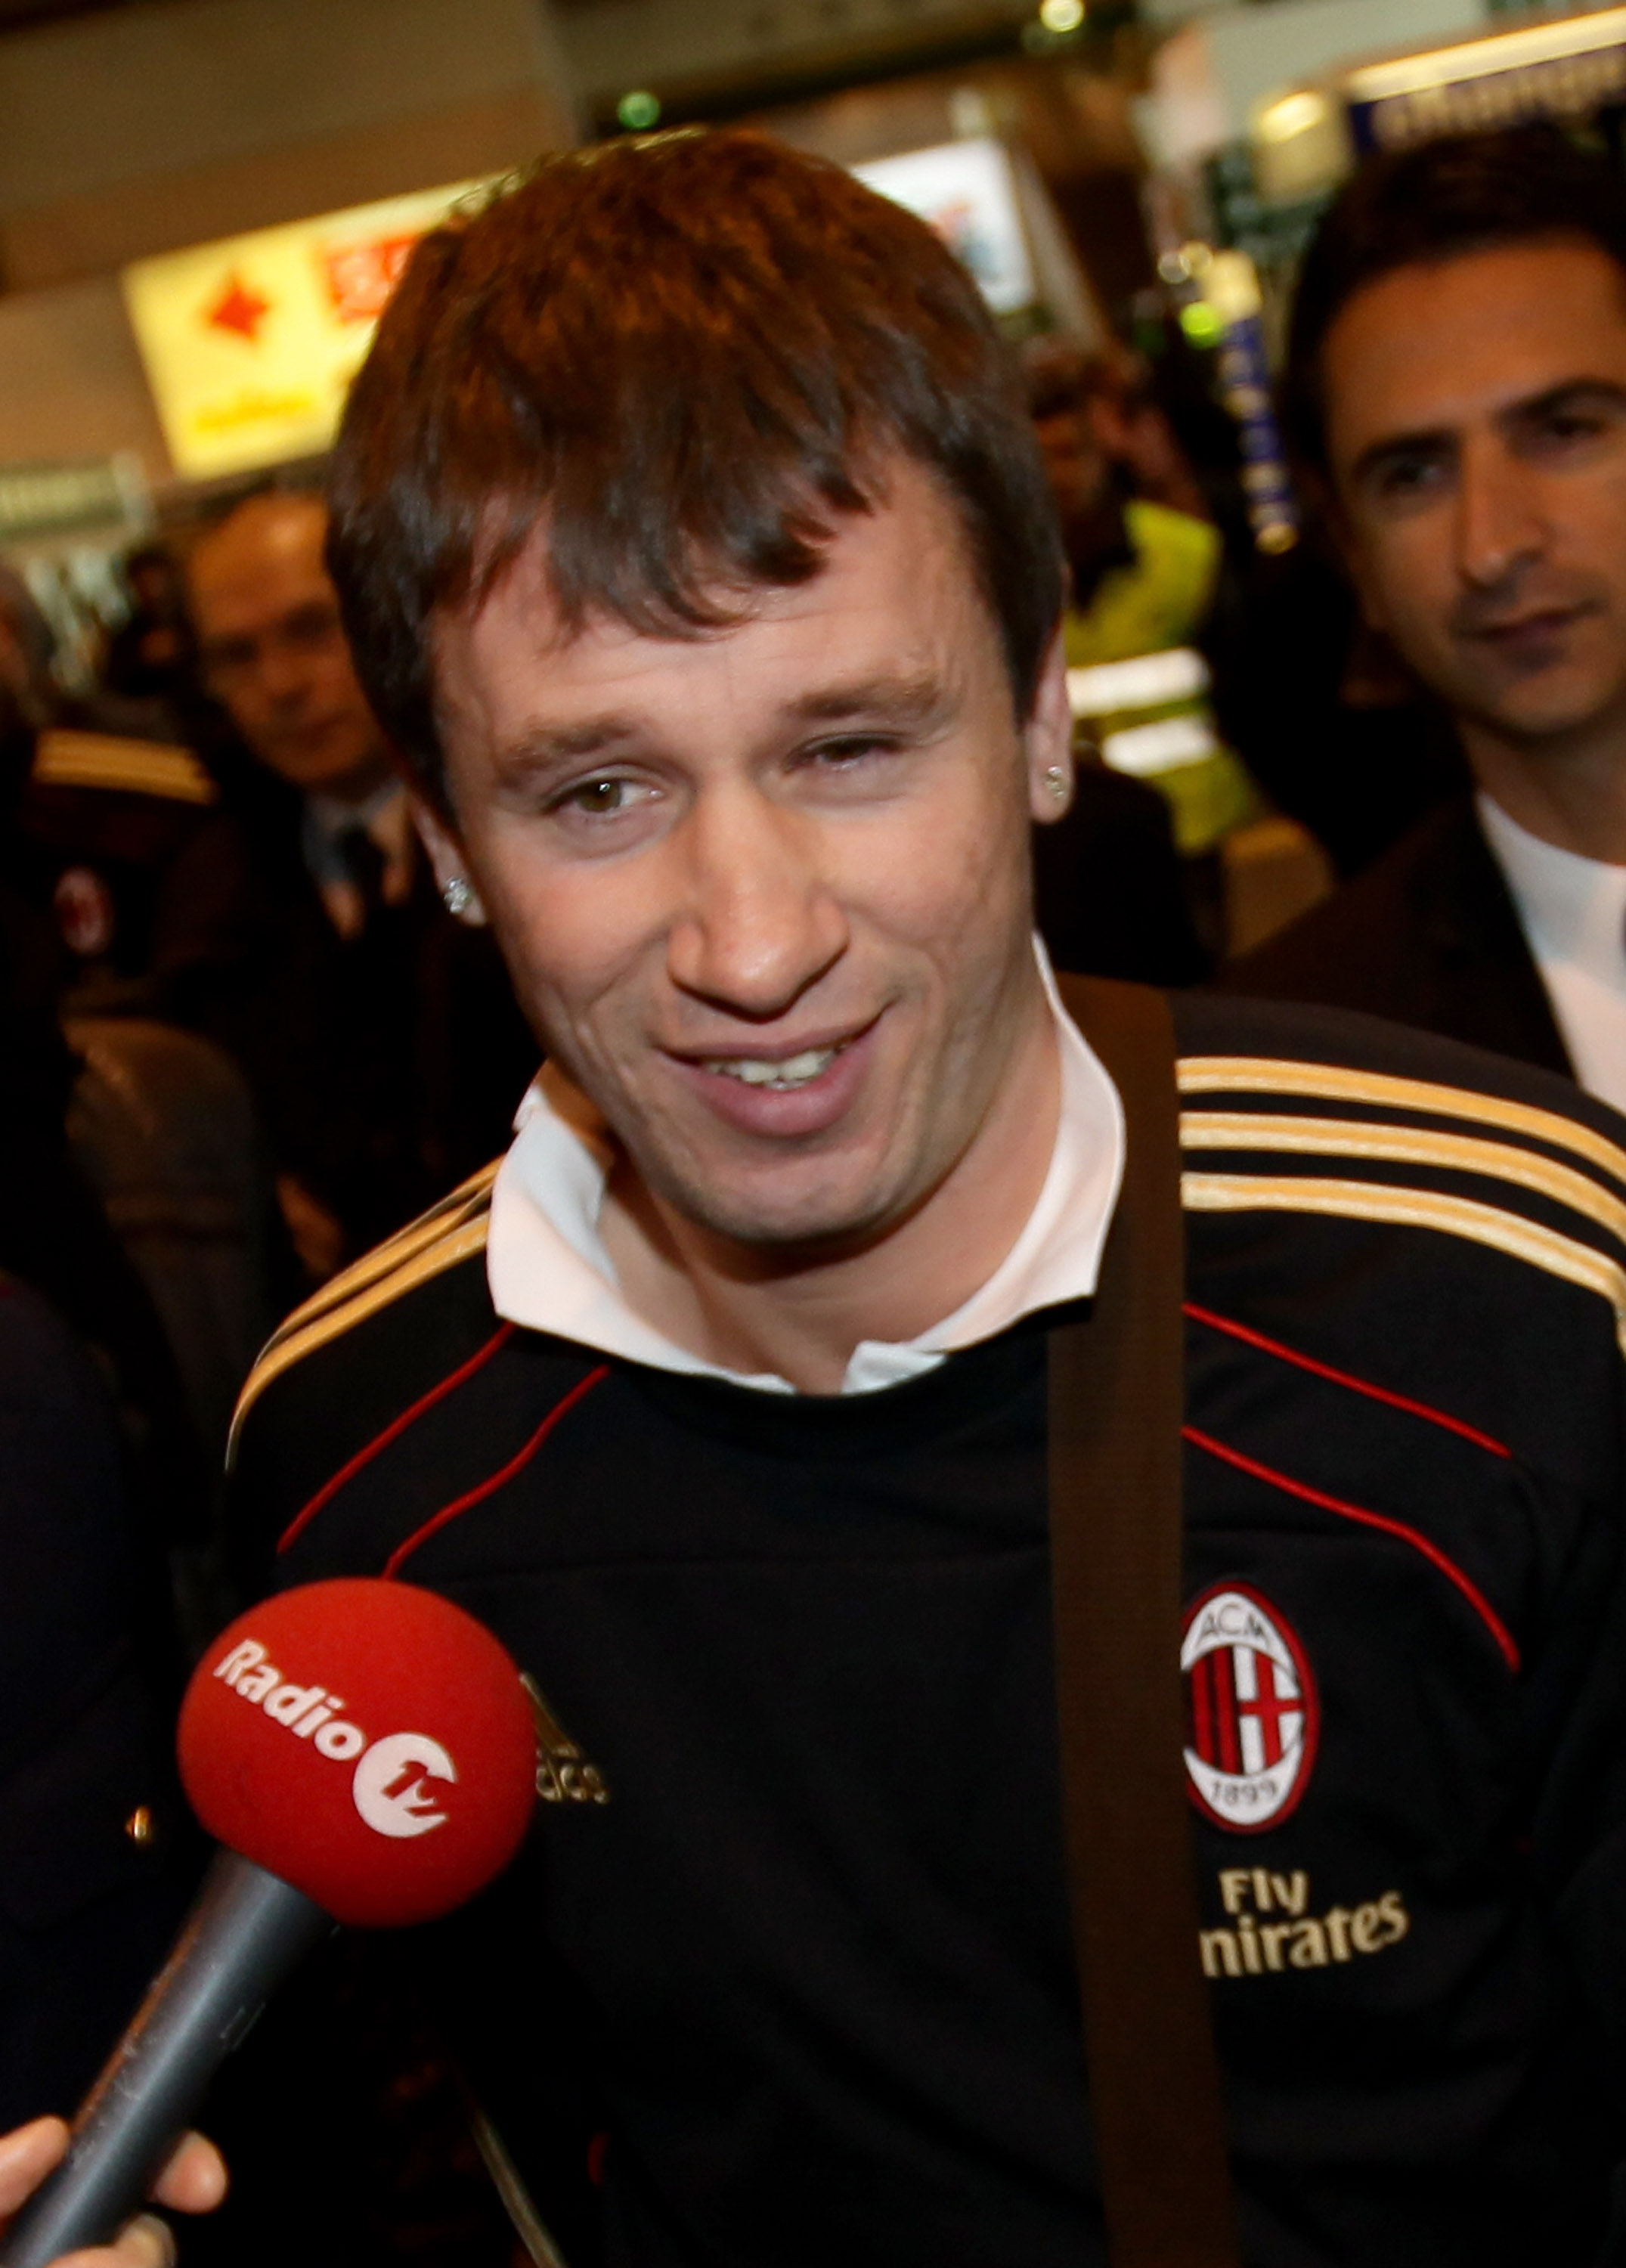 MILAN, ITALY - DECEMBER 27:  AC Milan forward Antonio Cassano is seen at Malpensa Airport before the departure for AC Milan Training Camp in Dubai  on December 27, 2010 in Milan, Italy.  (Photo by Vittorio Zunino Celotto/Getty Images)